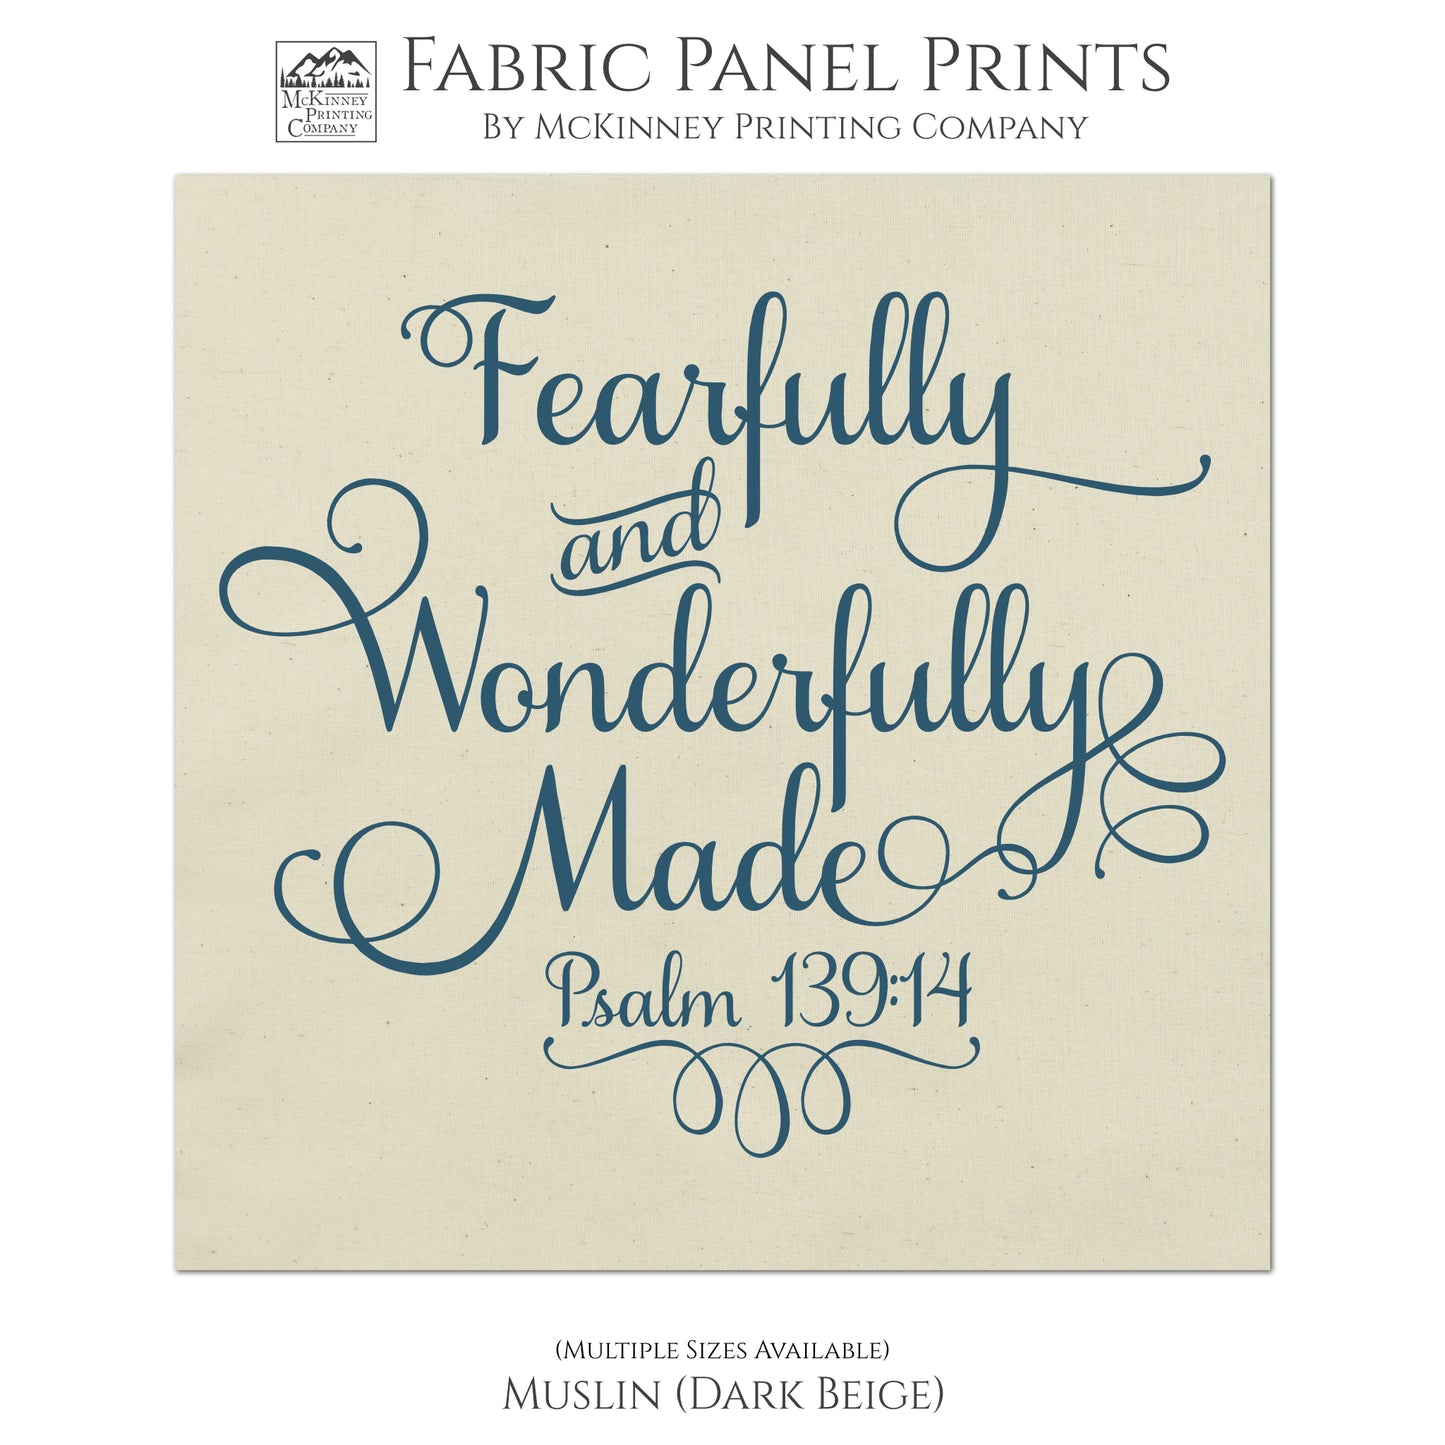 I am fearfully and wonderfully made - Psalm 139:14, Fabric Panel Print, Quilt Block, Scripture Fabric, Girl - Muslin